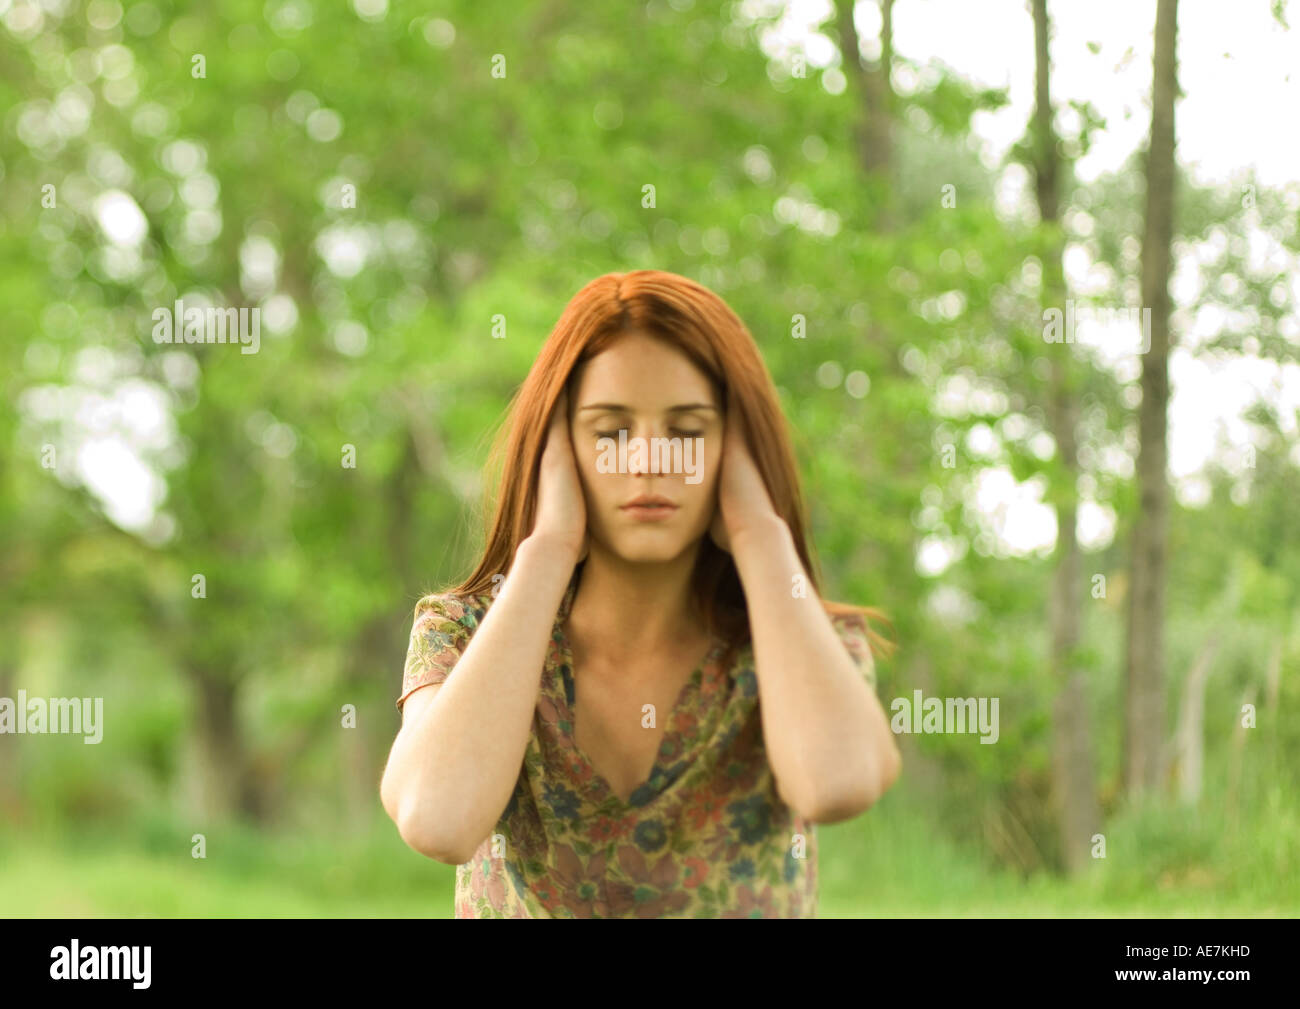 Woman with hands over ears and eyes shut, outdoors Stock Photo